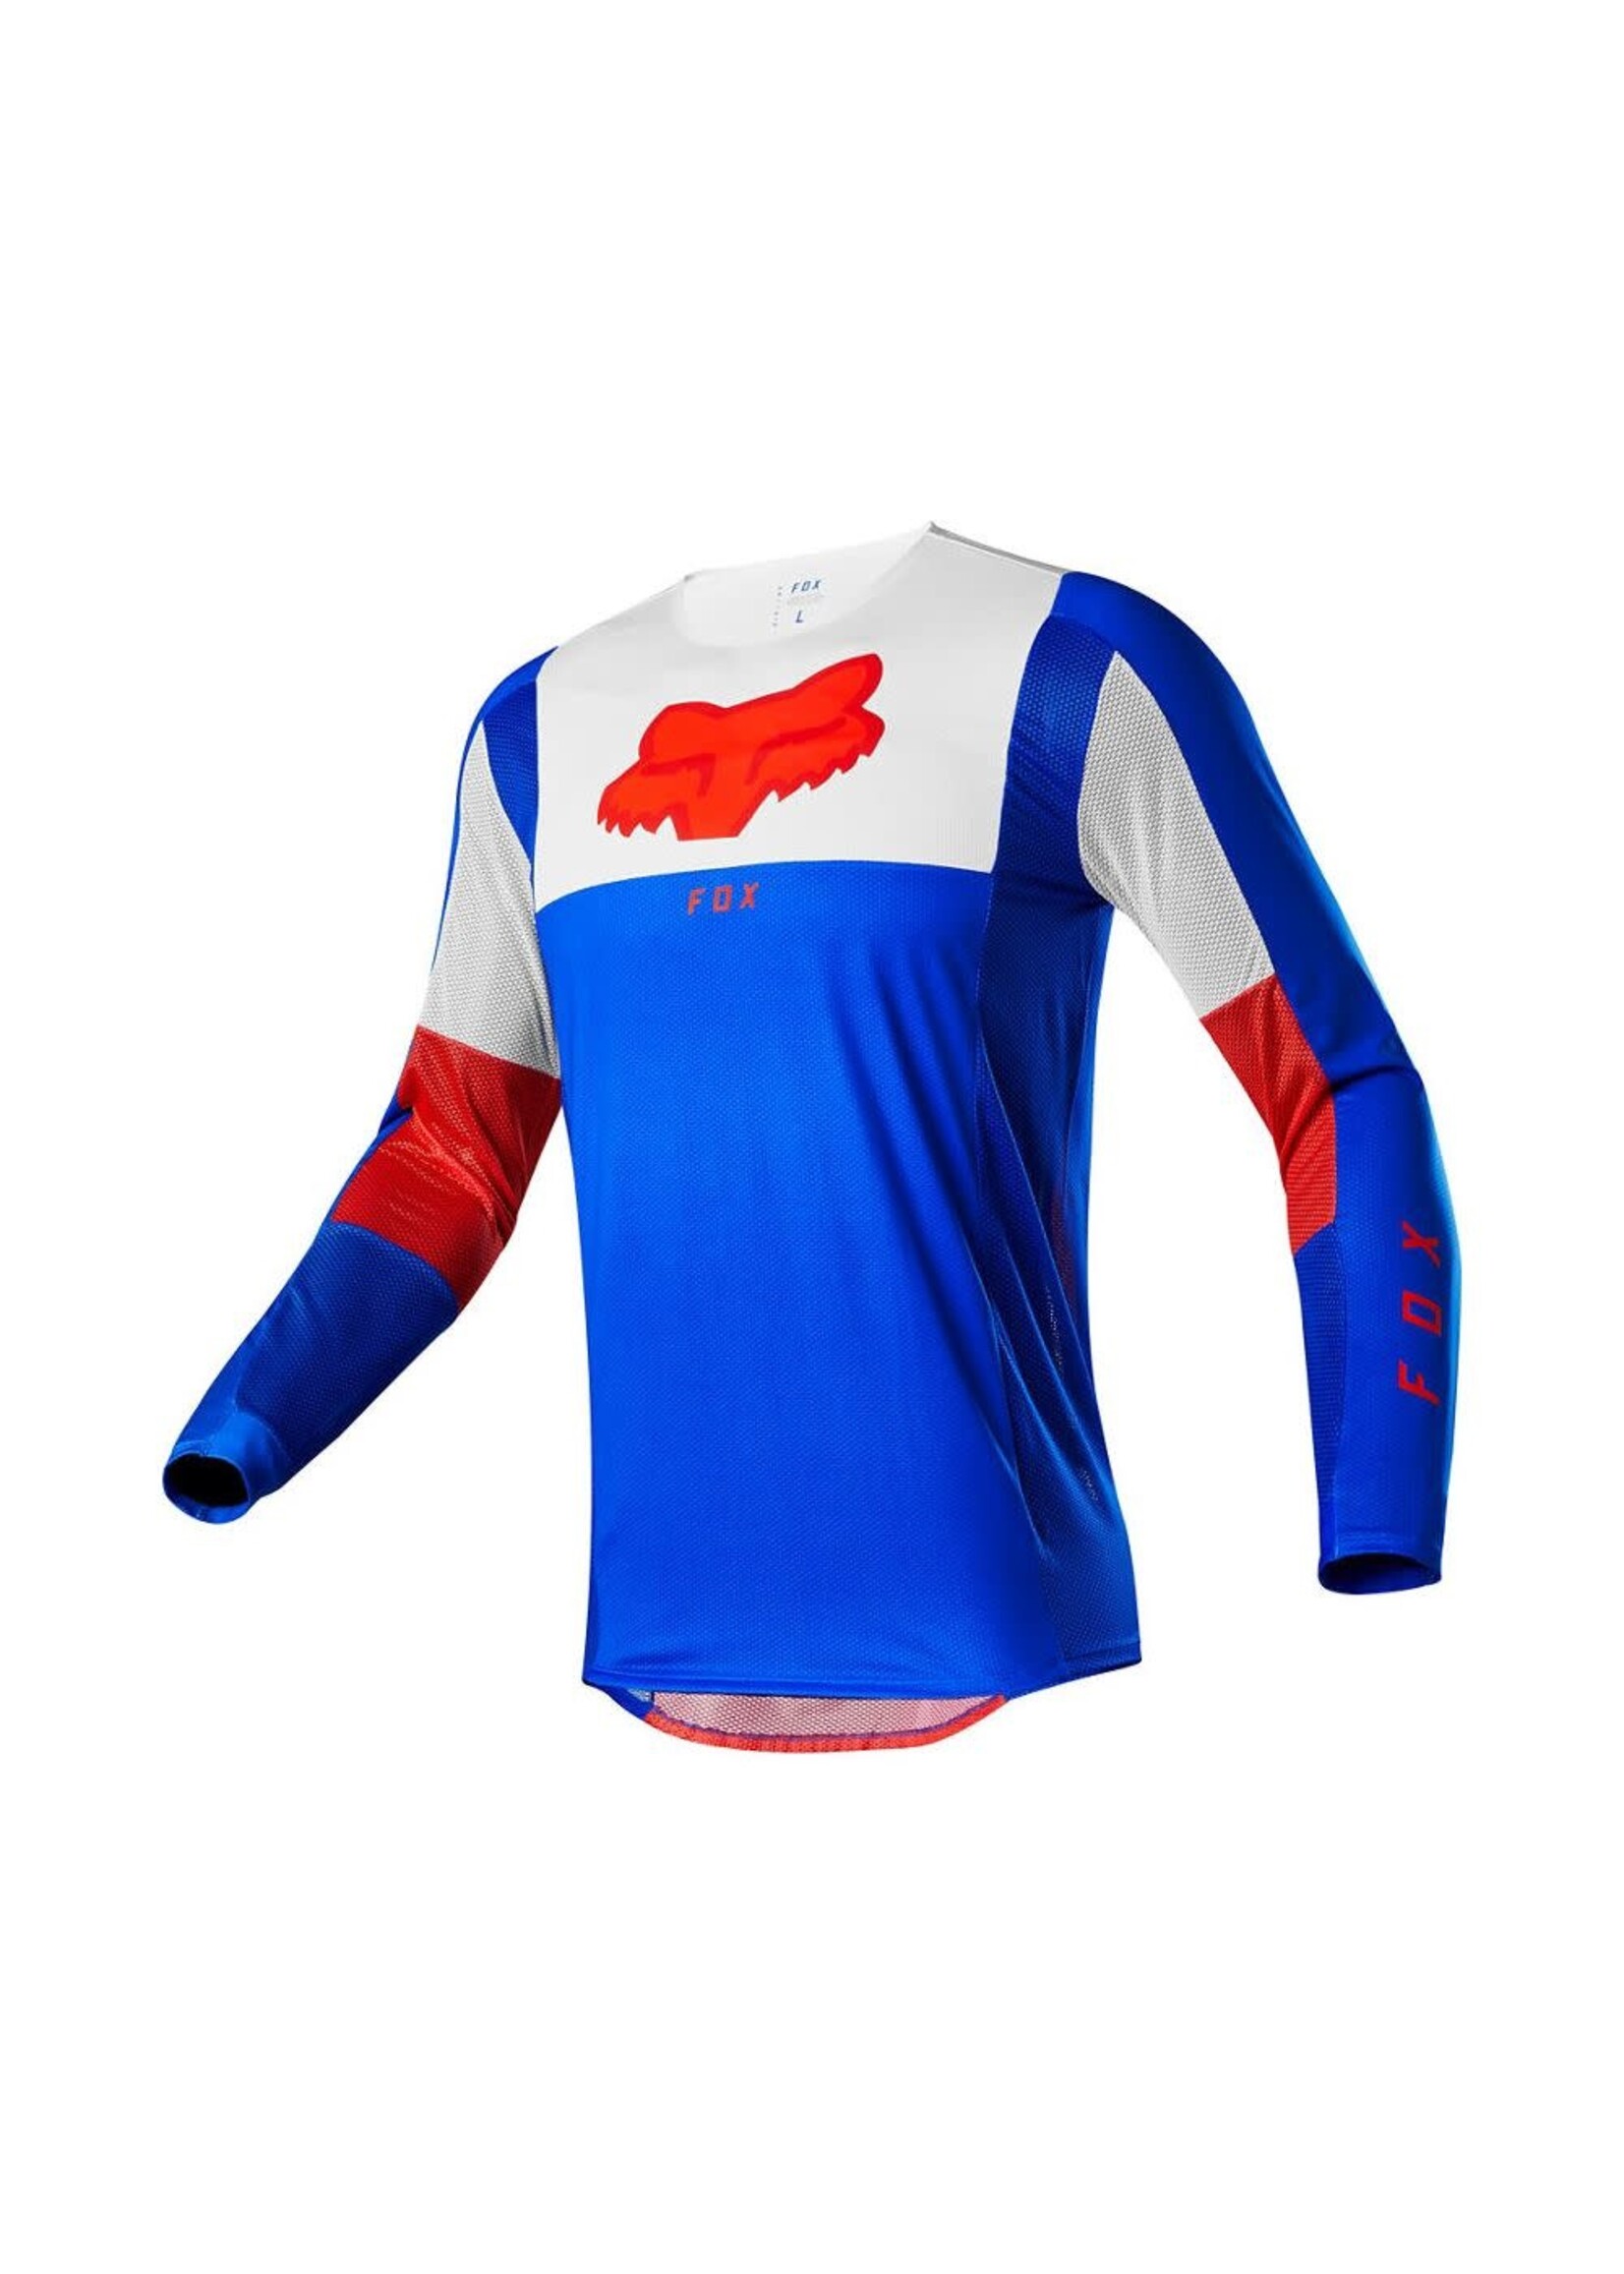 FOX RACING 2020 Airline LE Pilr Jersey, Blue/Red